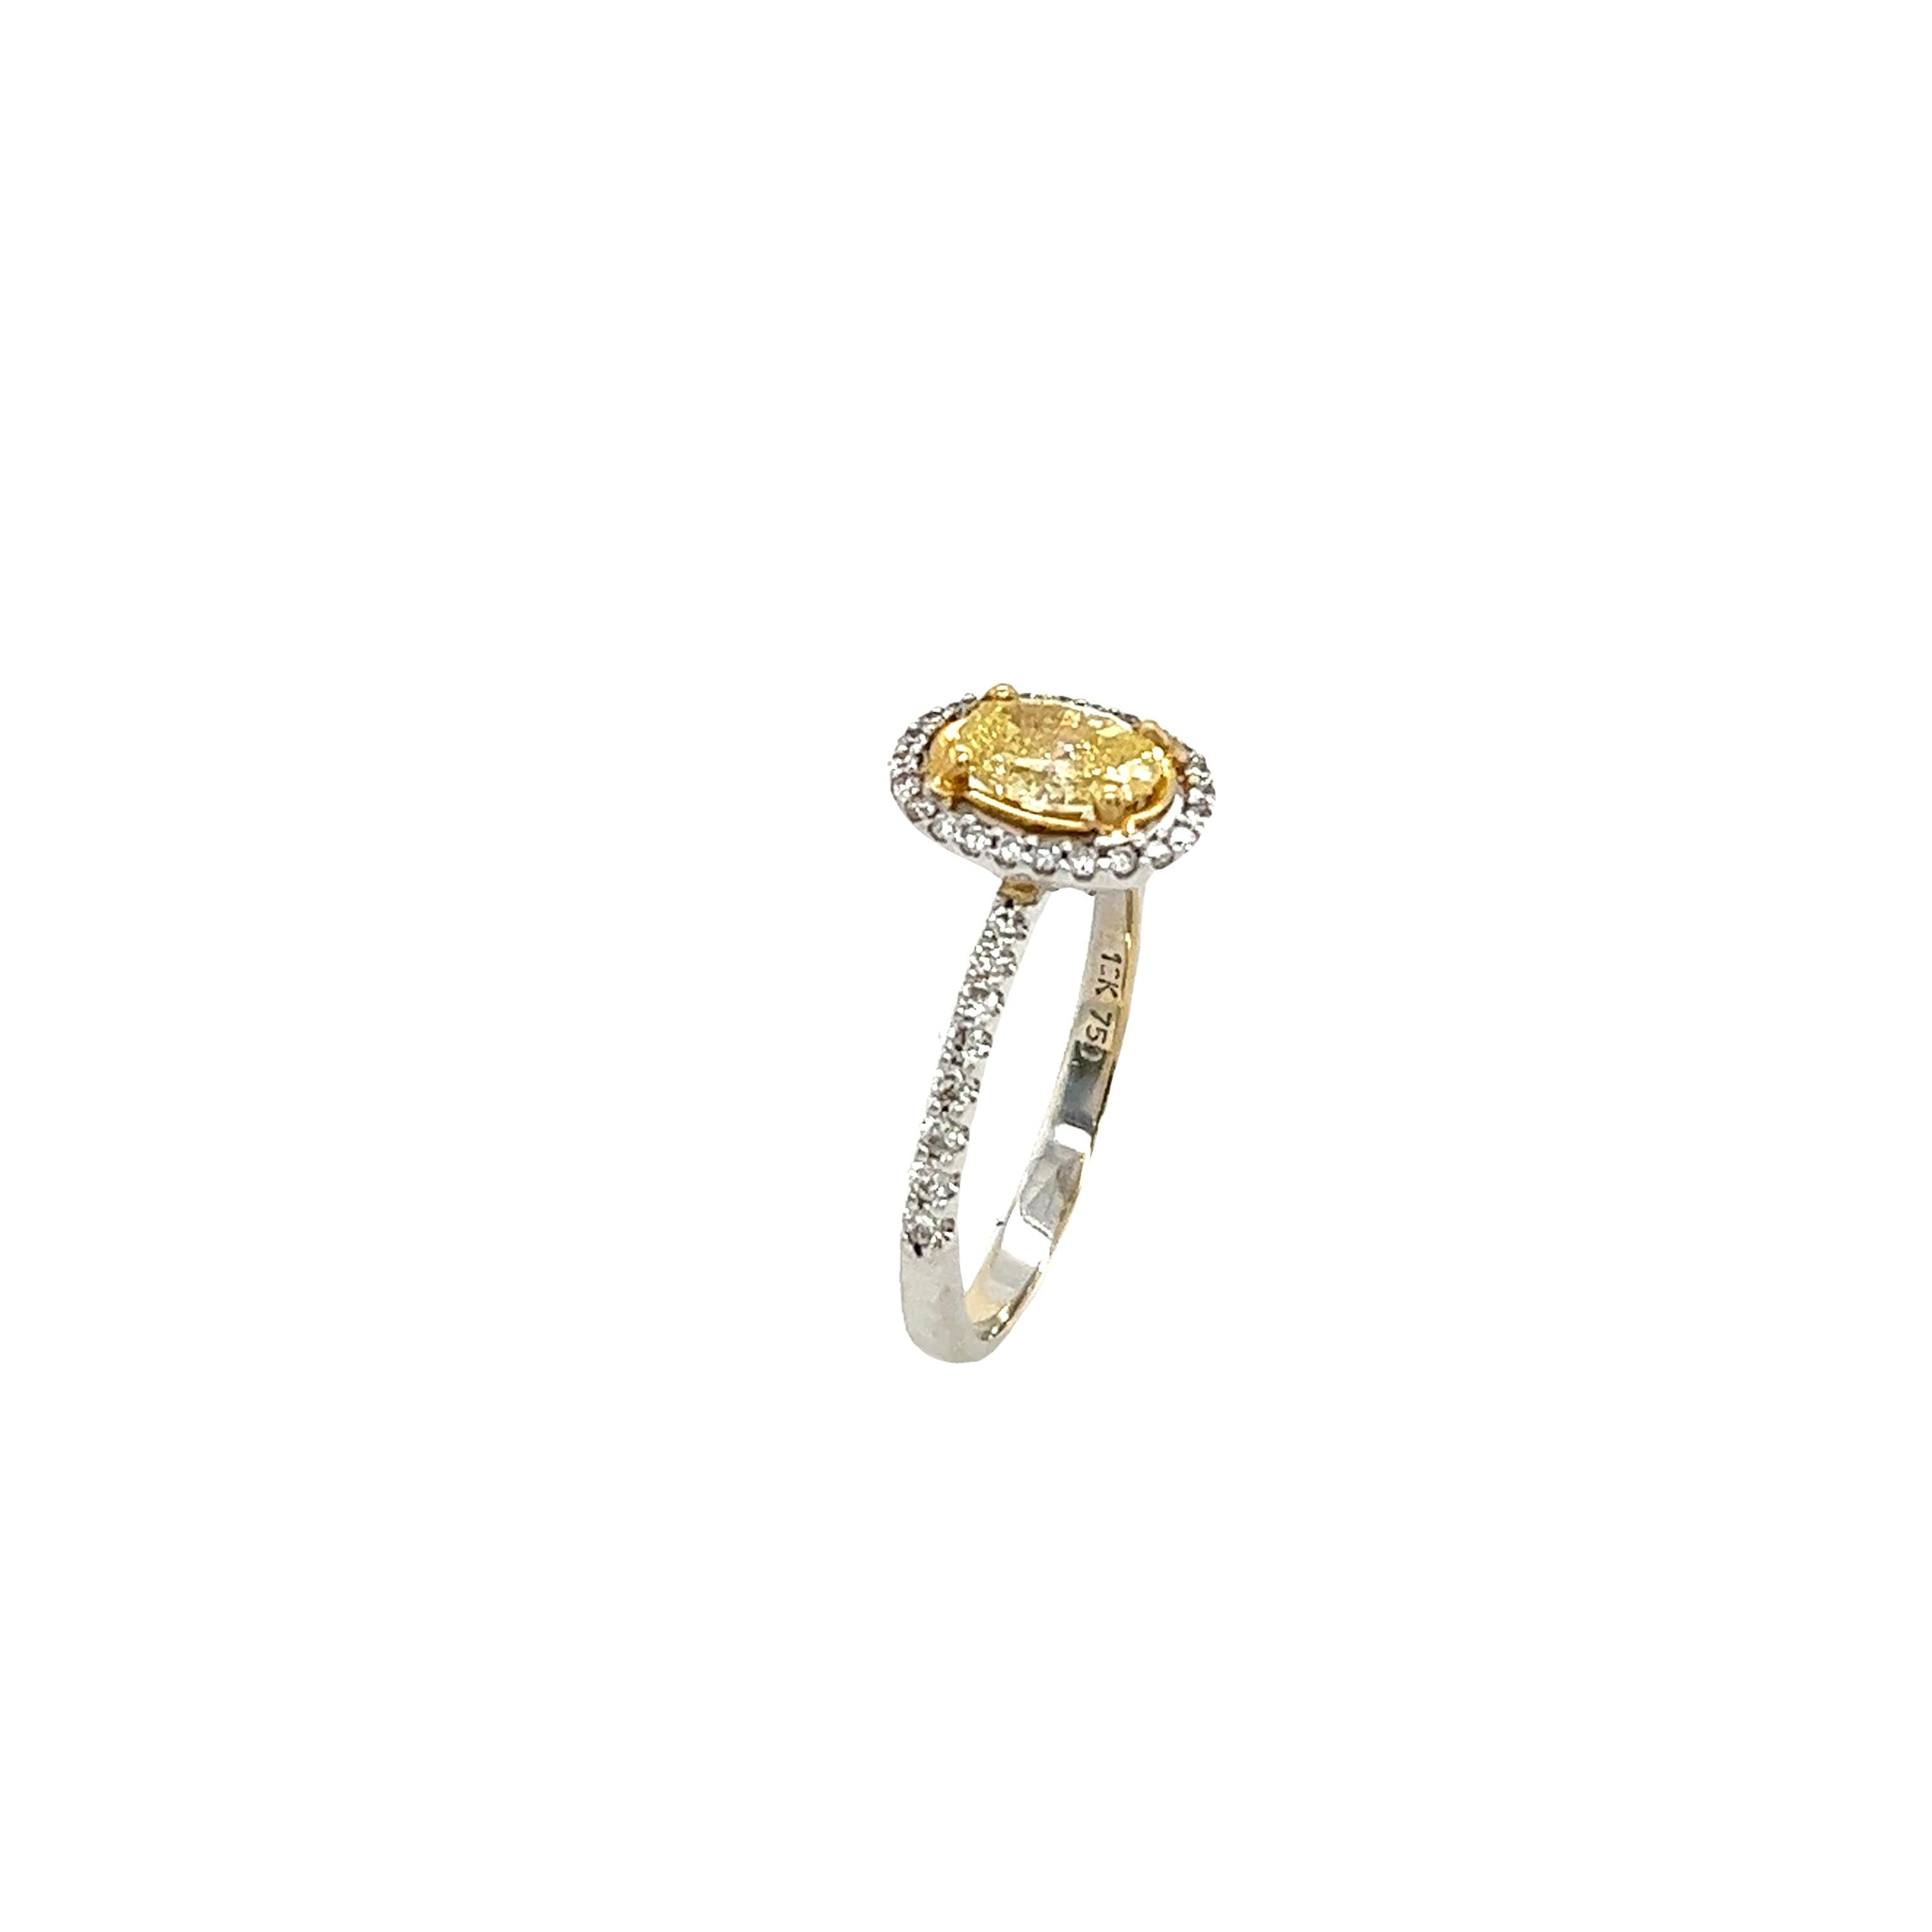 18ct White & Yellow Gold Ring Set With 0.63ct Fancy Yellow SI1 Oval Diamond In Excellent Condition For Sale In London, GB